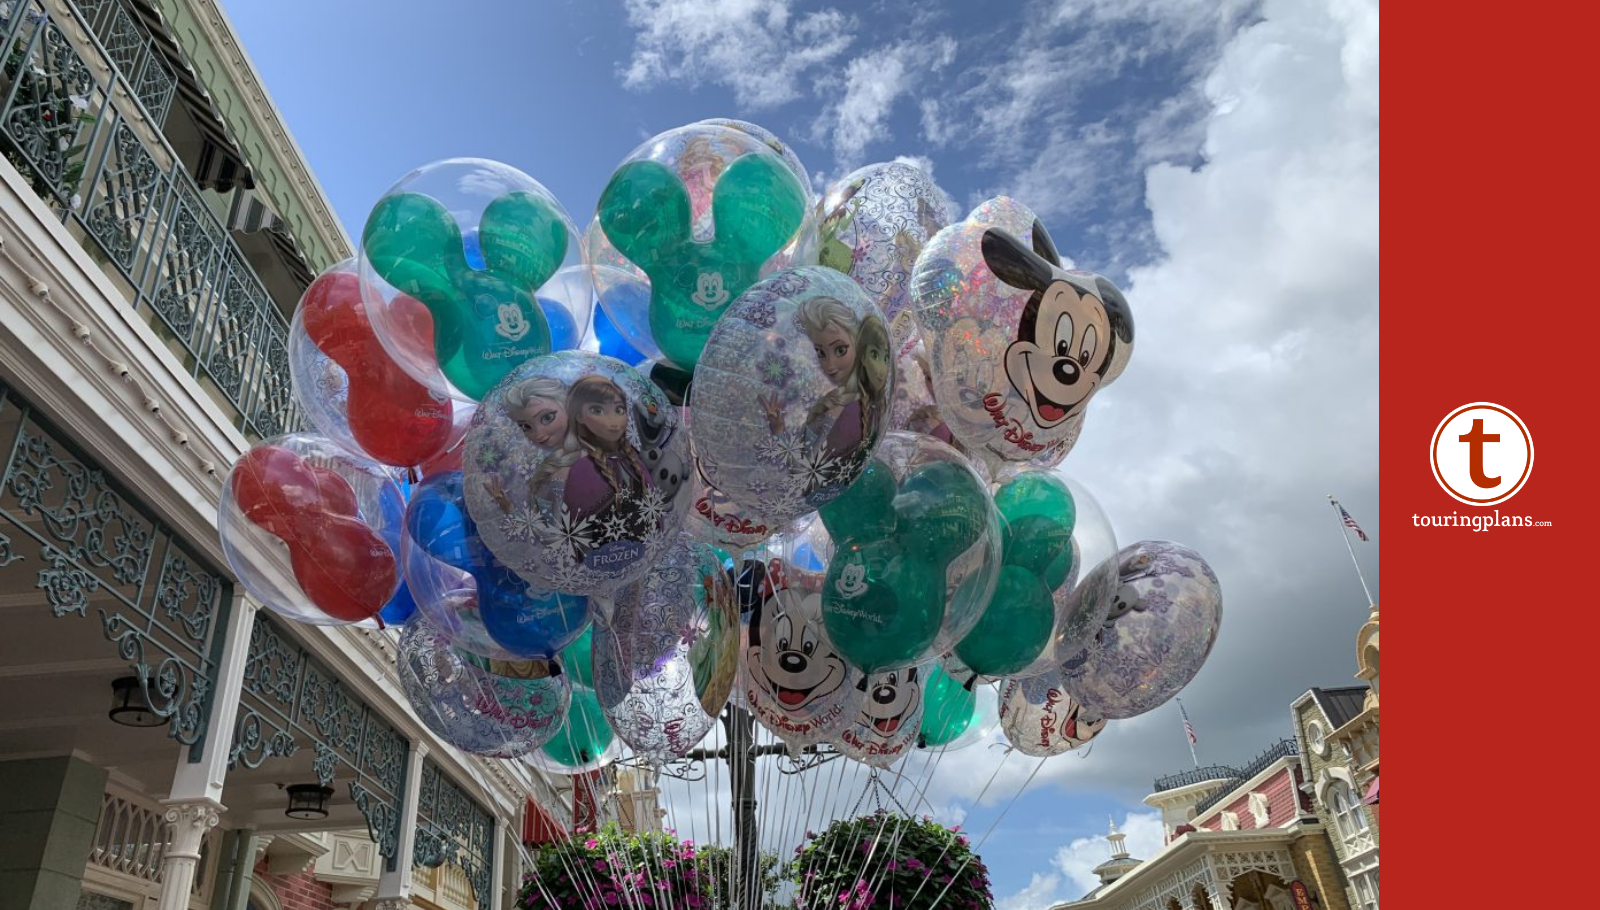 The Disney Parks Balloon: Classic Souvenir or Problematic Waste